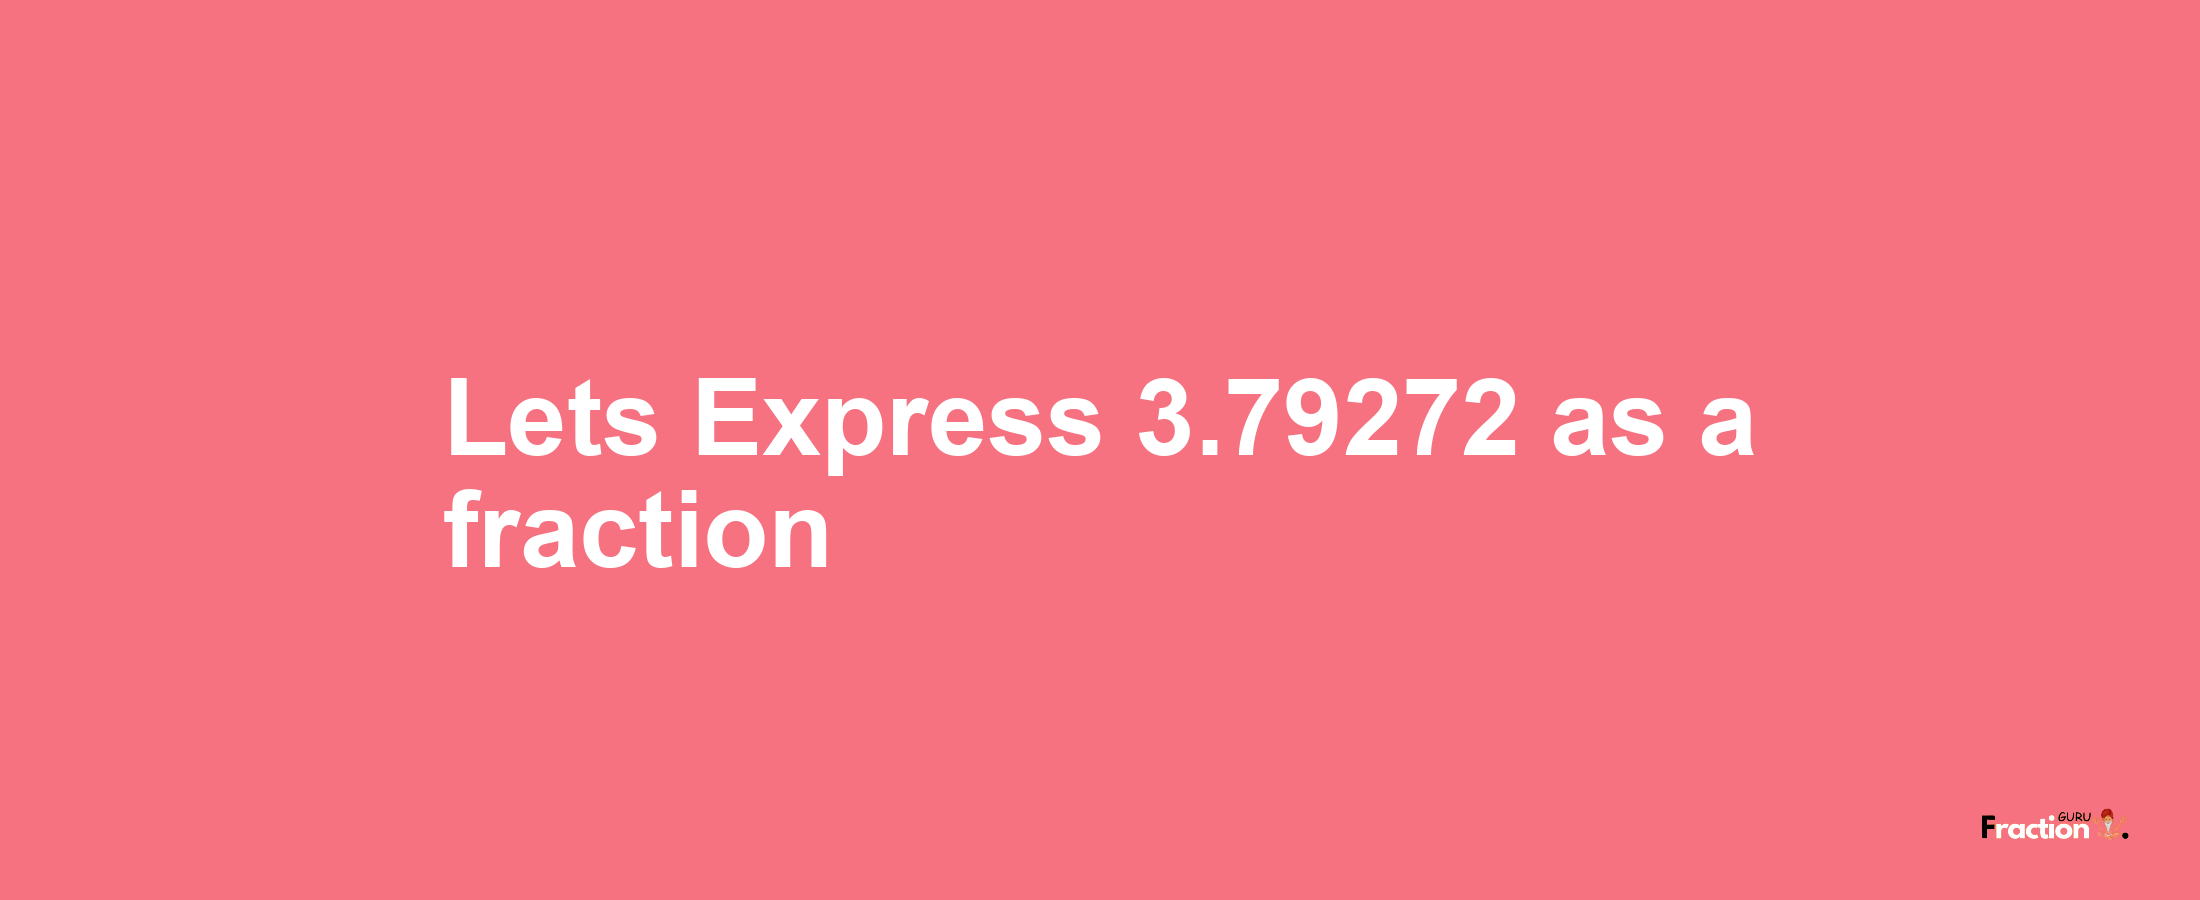 Lets Express 3.79272 as afraction